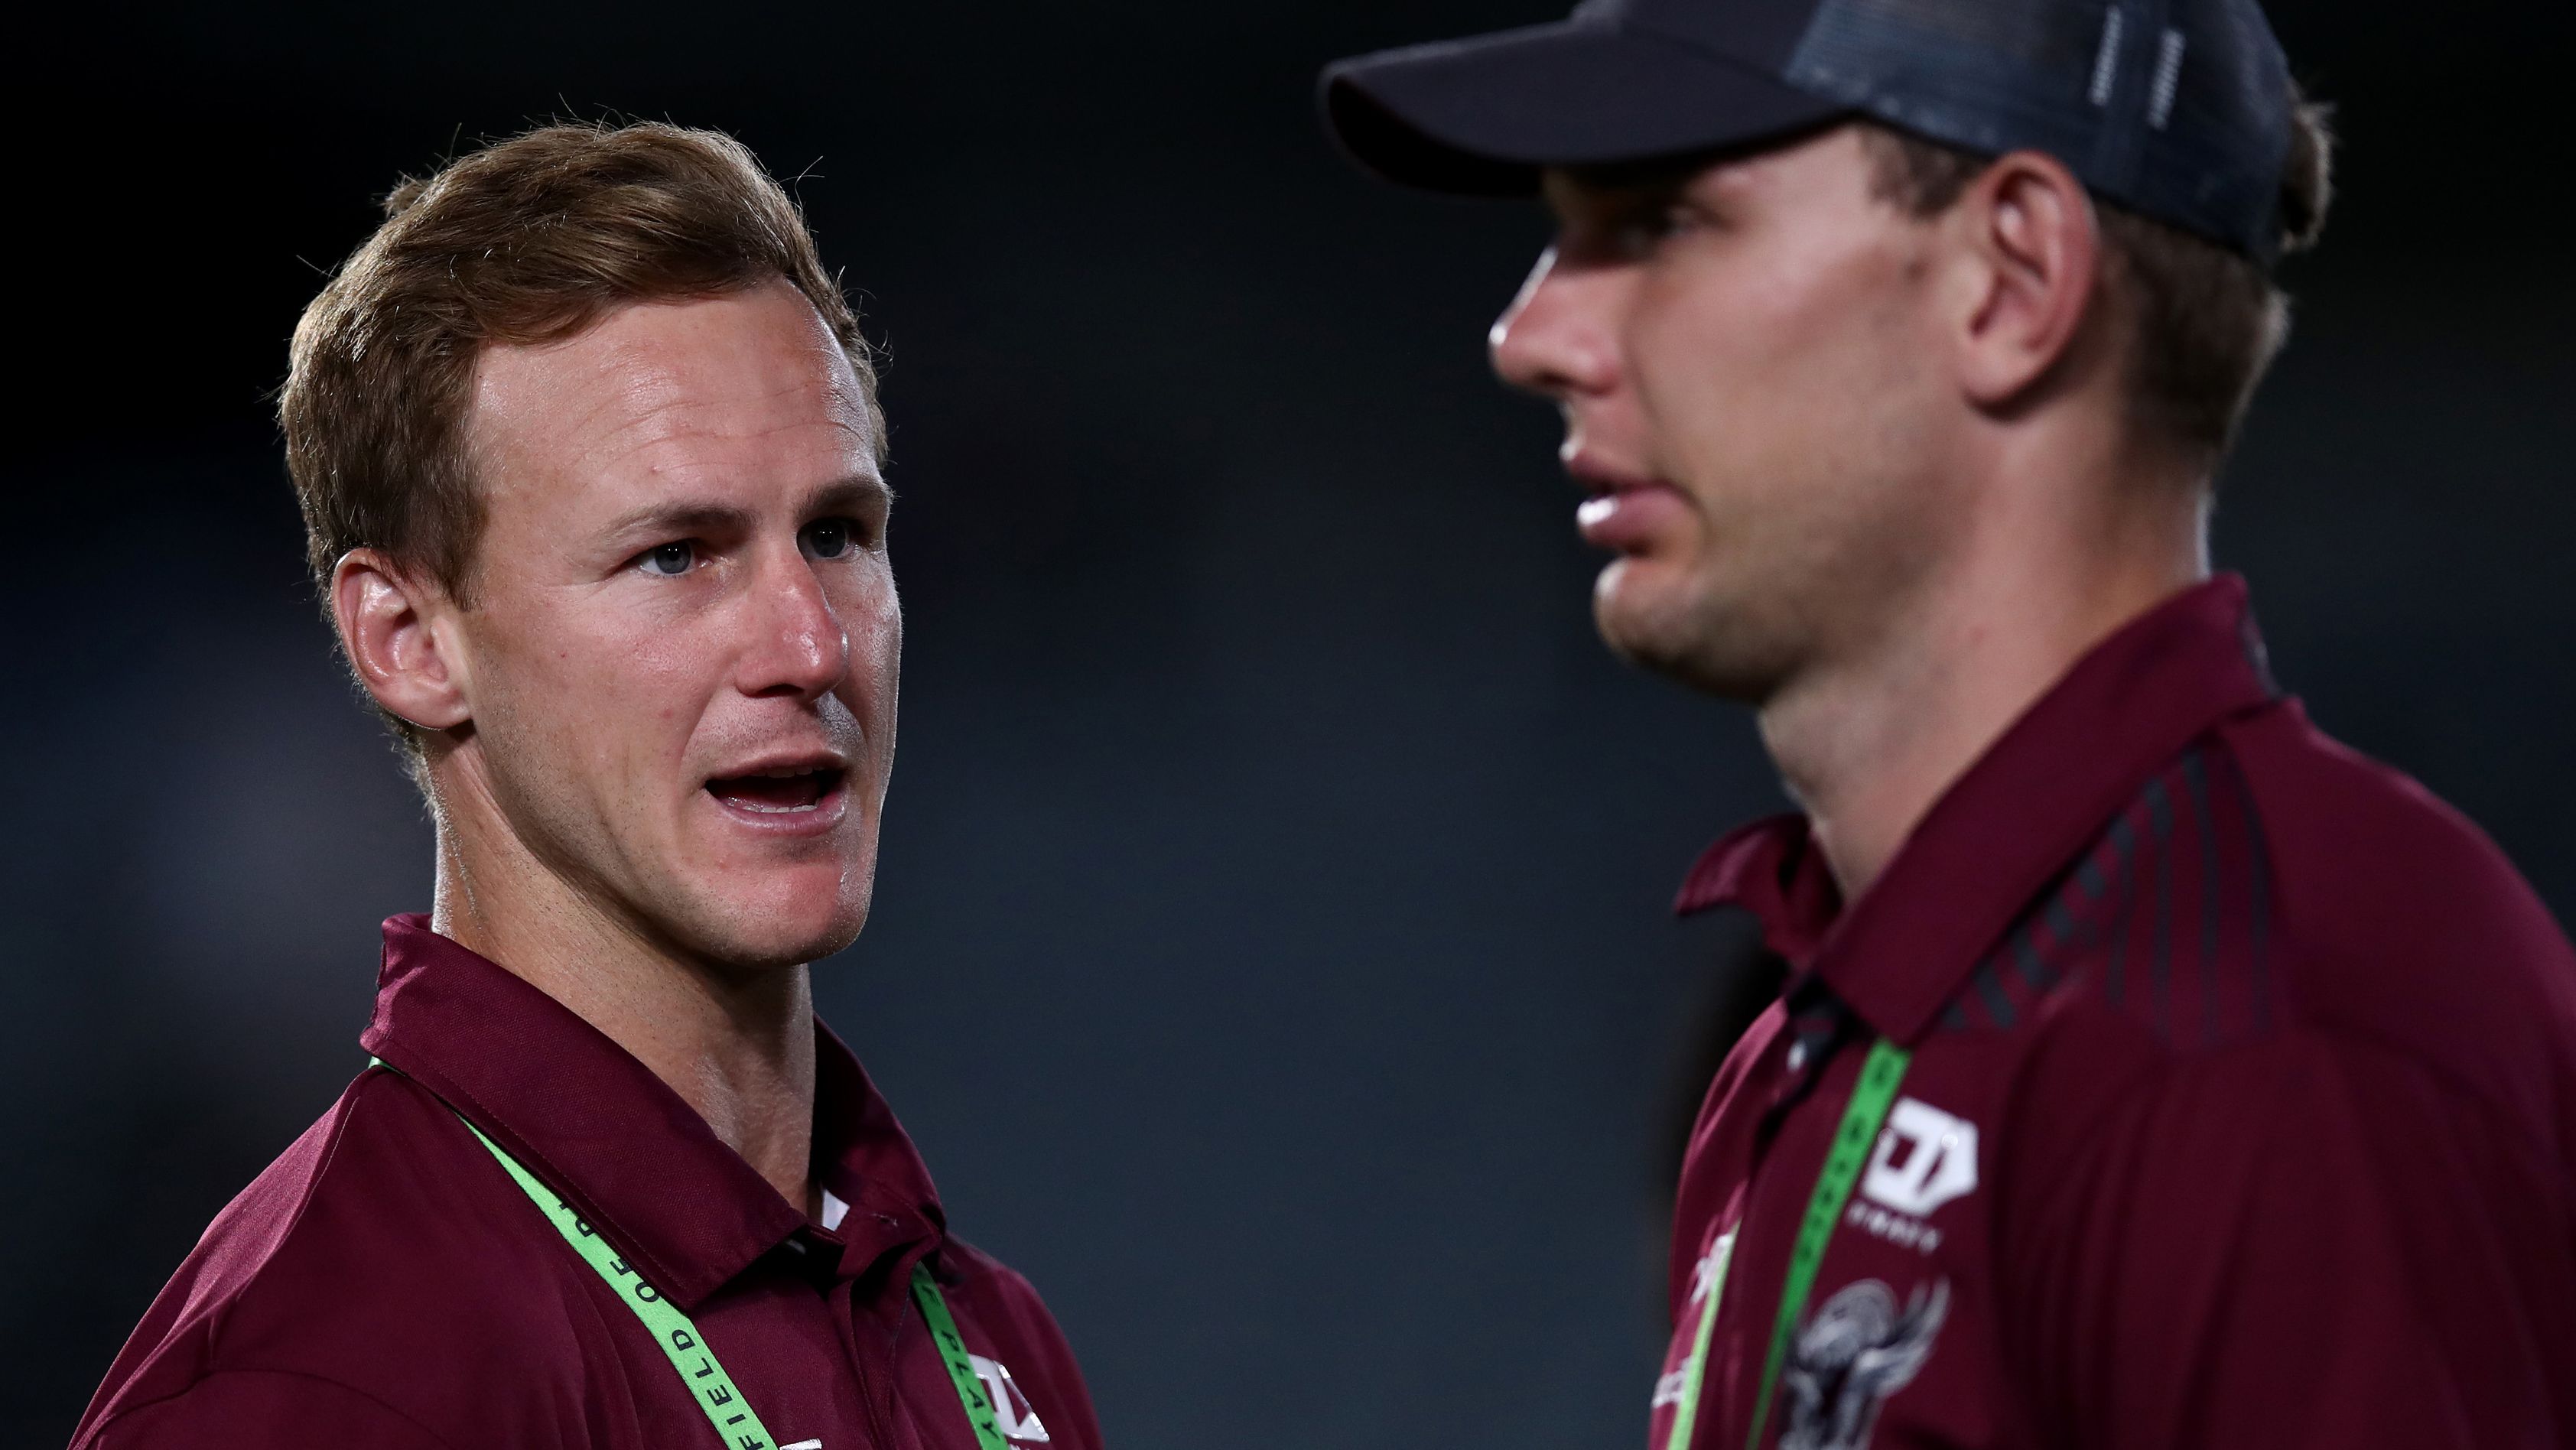 Daly Cherry-Evans talks to Tom Trbojevic of the Sea Eagles following the South Sydney Rabbitohs and the Manly Sea Eagles at Industree Group Stadium on February 10, 2023 in Gosford, Australia. (Photo by Jason McCawley/Getty Images)